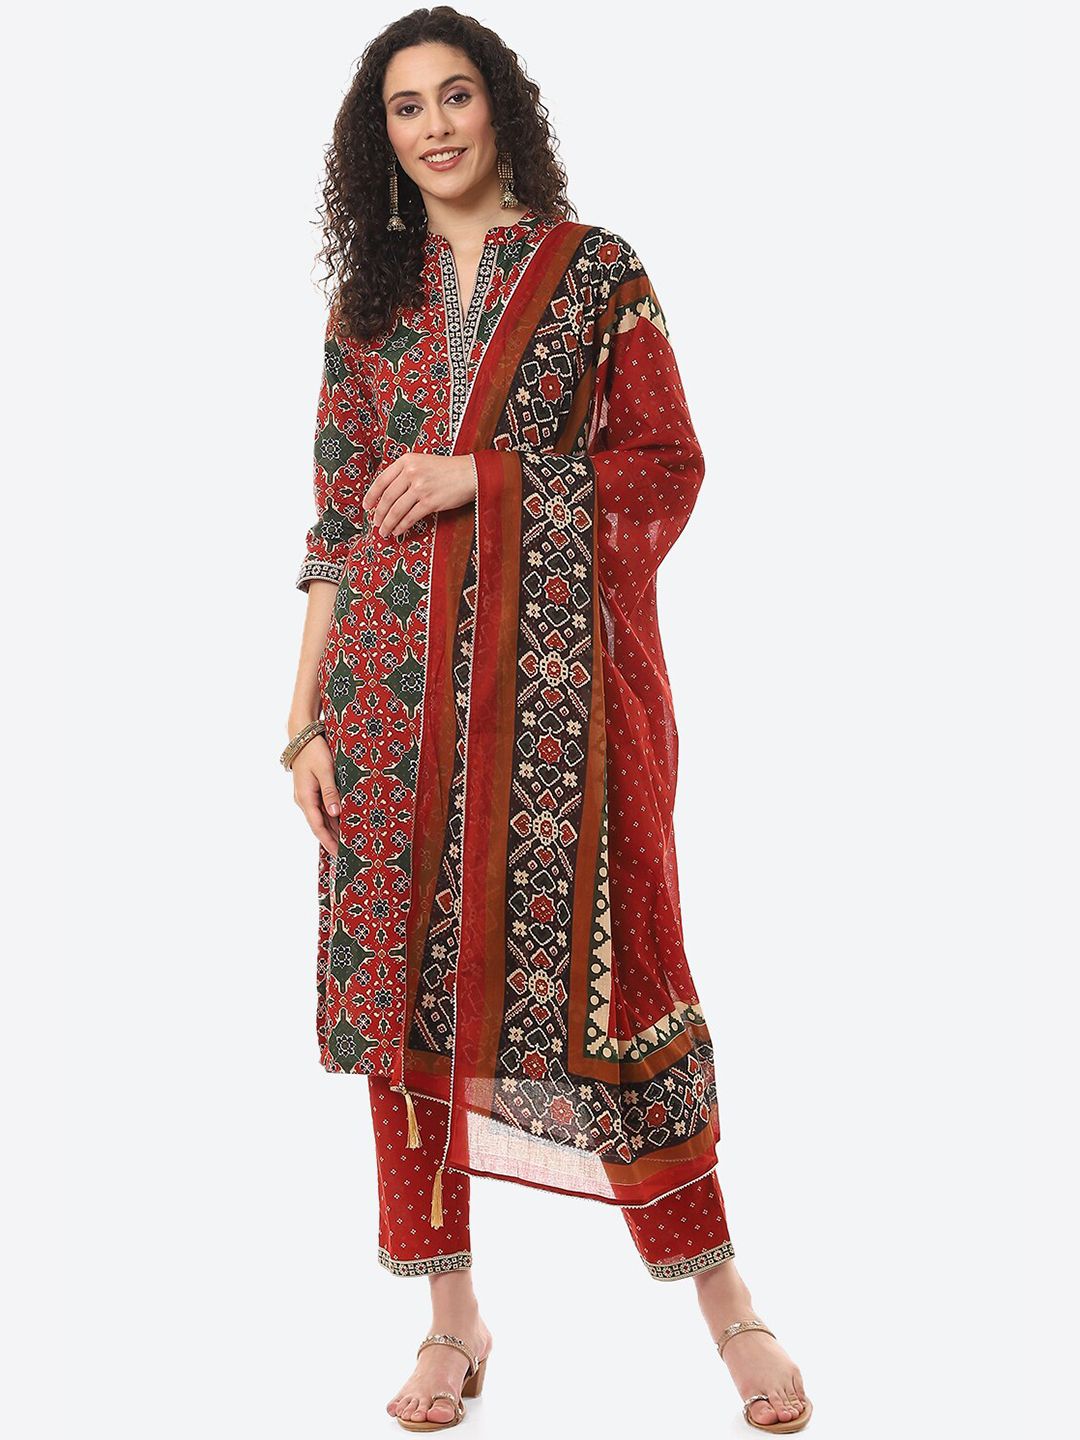 Biba Red & Black Printed Pure Cotton Unstitched Dress Material Price in India